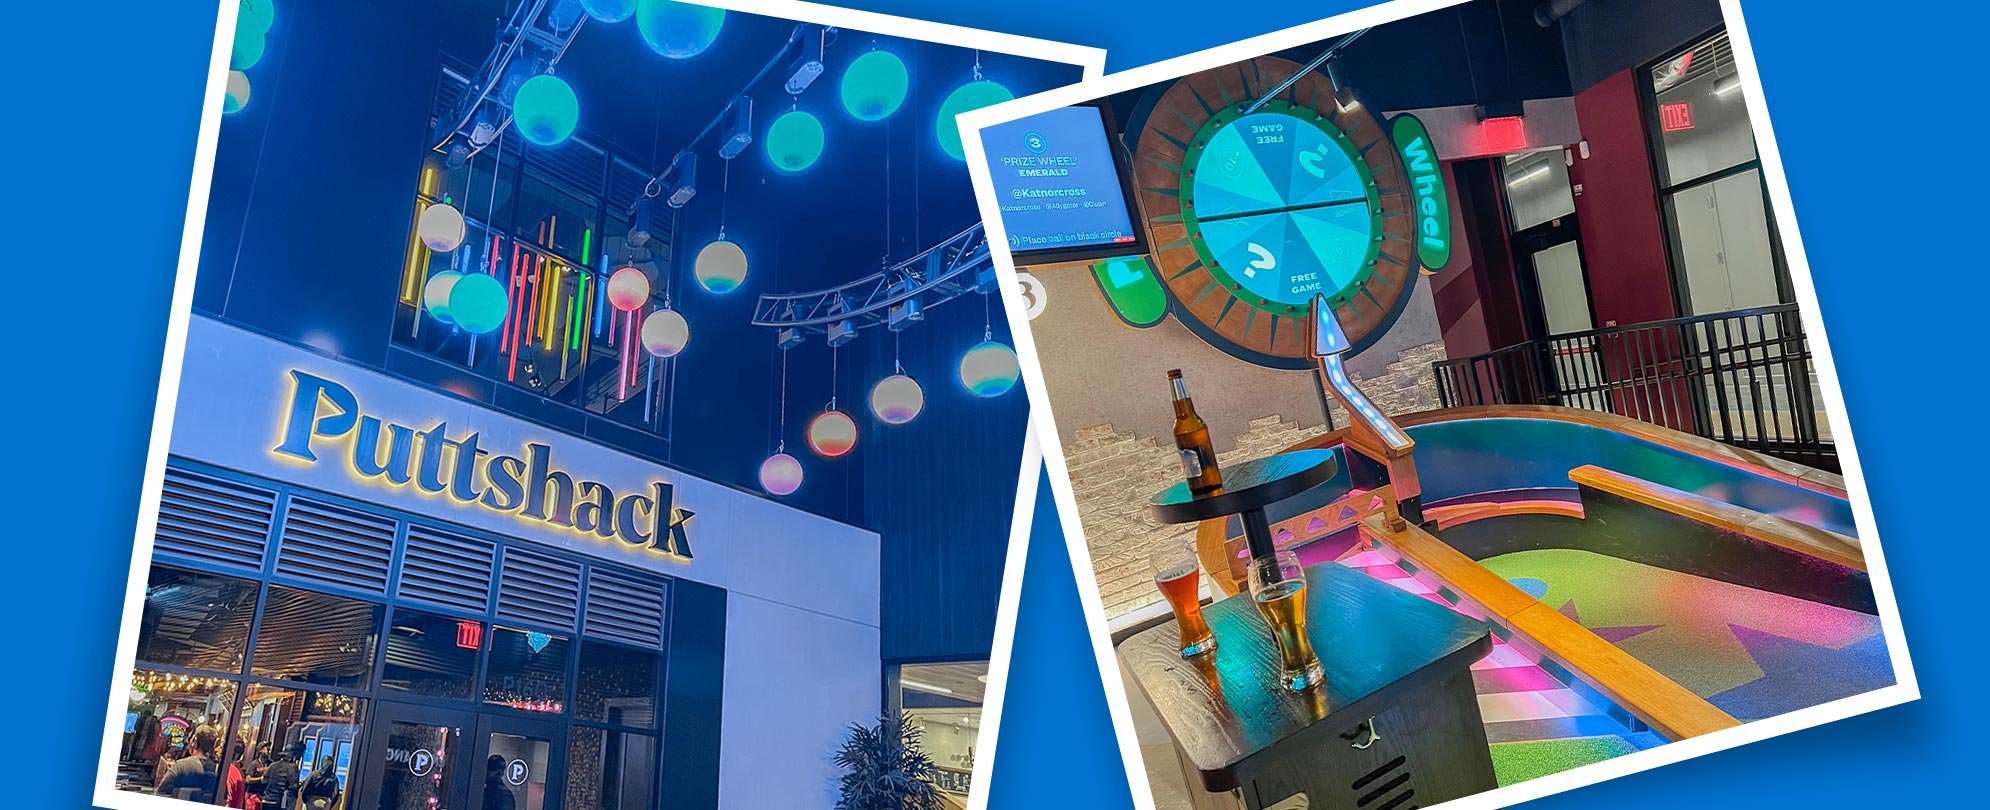 Two snapshots on a blue background showing the entrance and large sign for Puttshack and one of the colorful holes of the indoor miniature golf course.